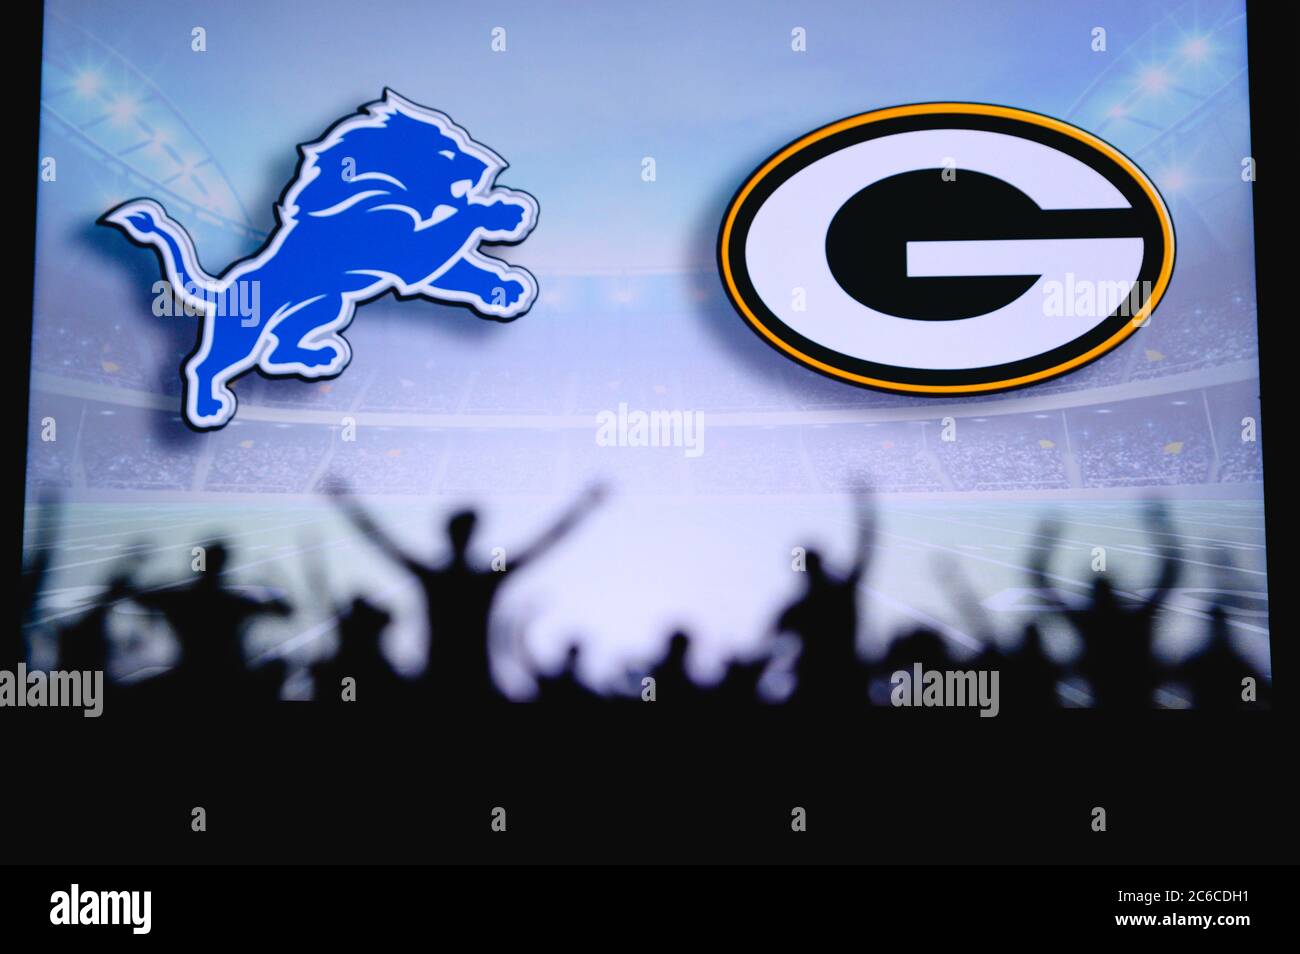 Detroit Lions vs. Green Bay Packers. Fans support on NFL Game. Silhouette of supporters, big screen with two rivals in background. Stock Photo